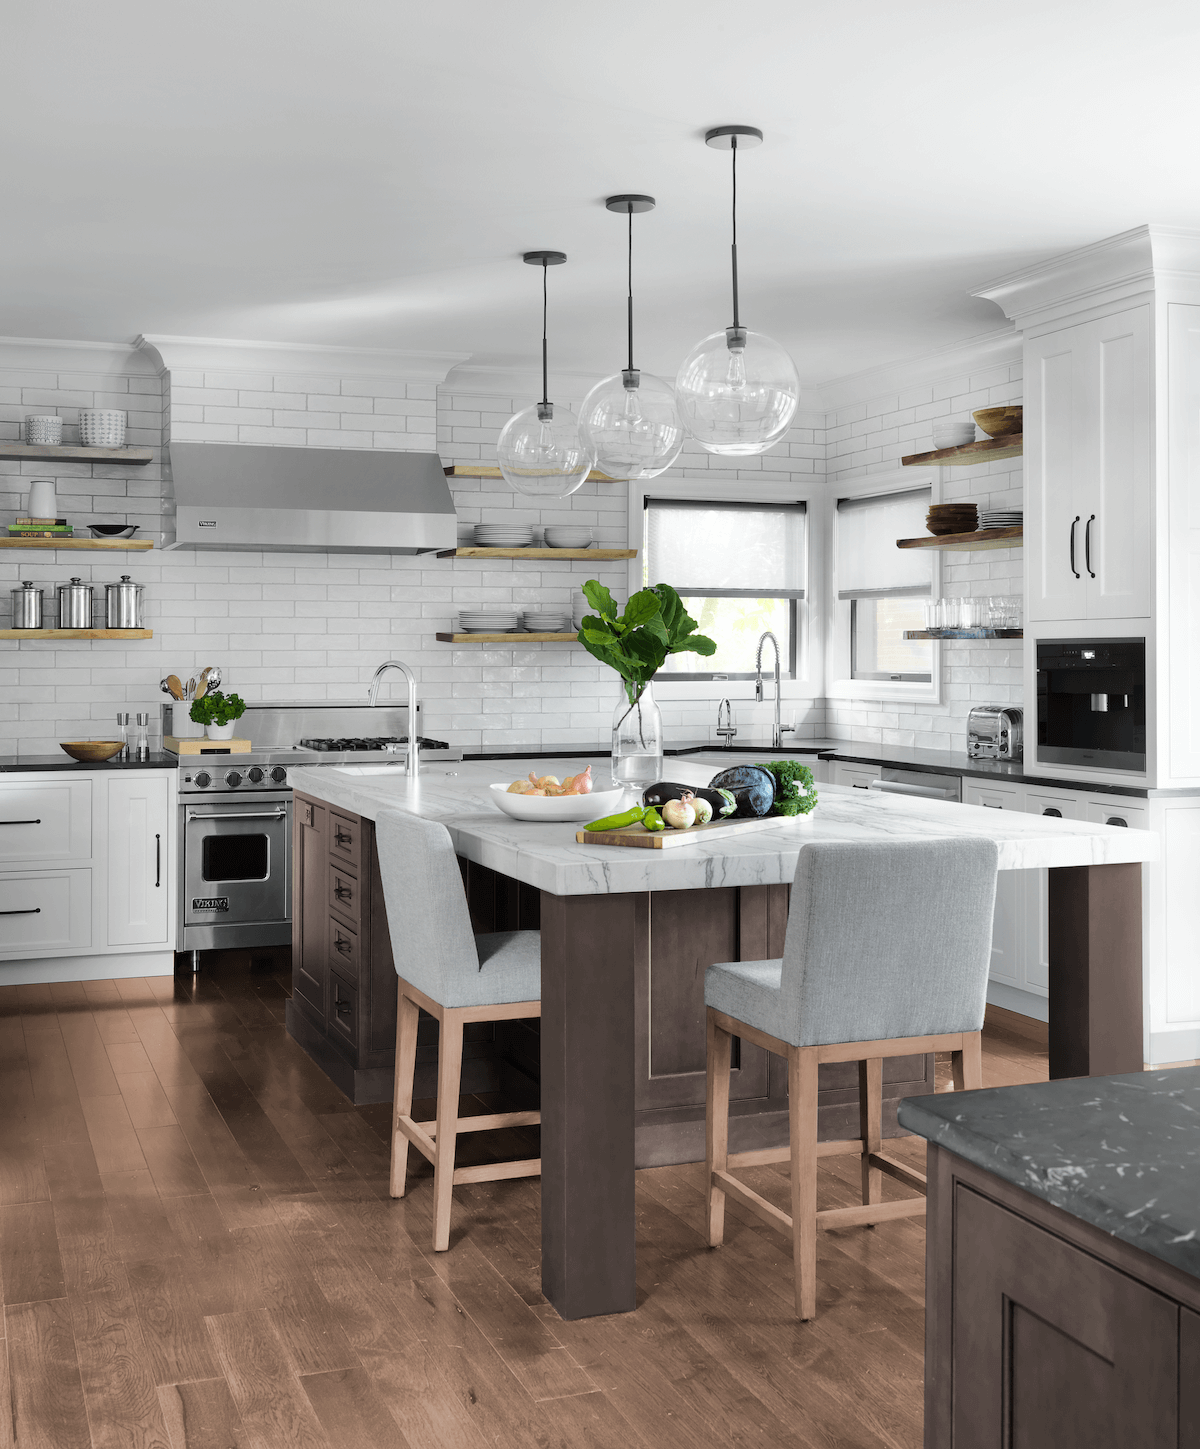 Bright white, casual family kitchen with an island large enough to seat a family of four.